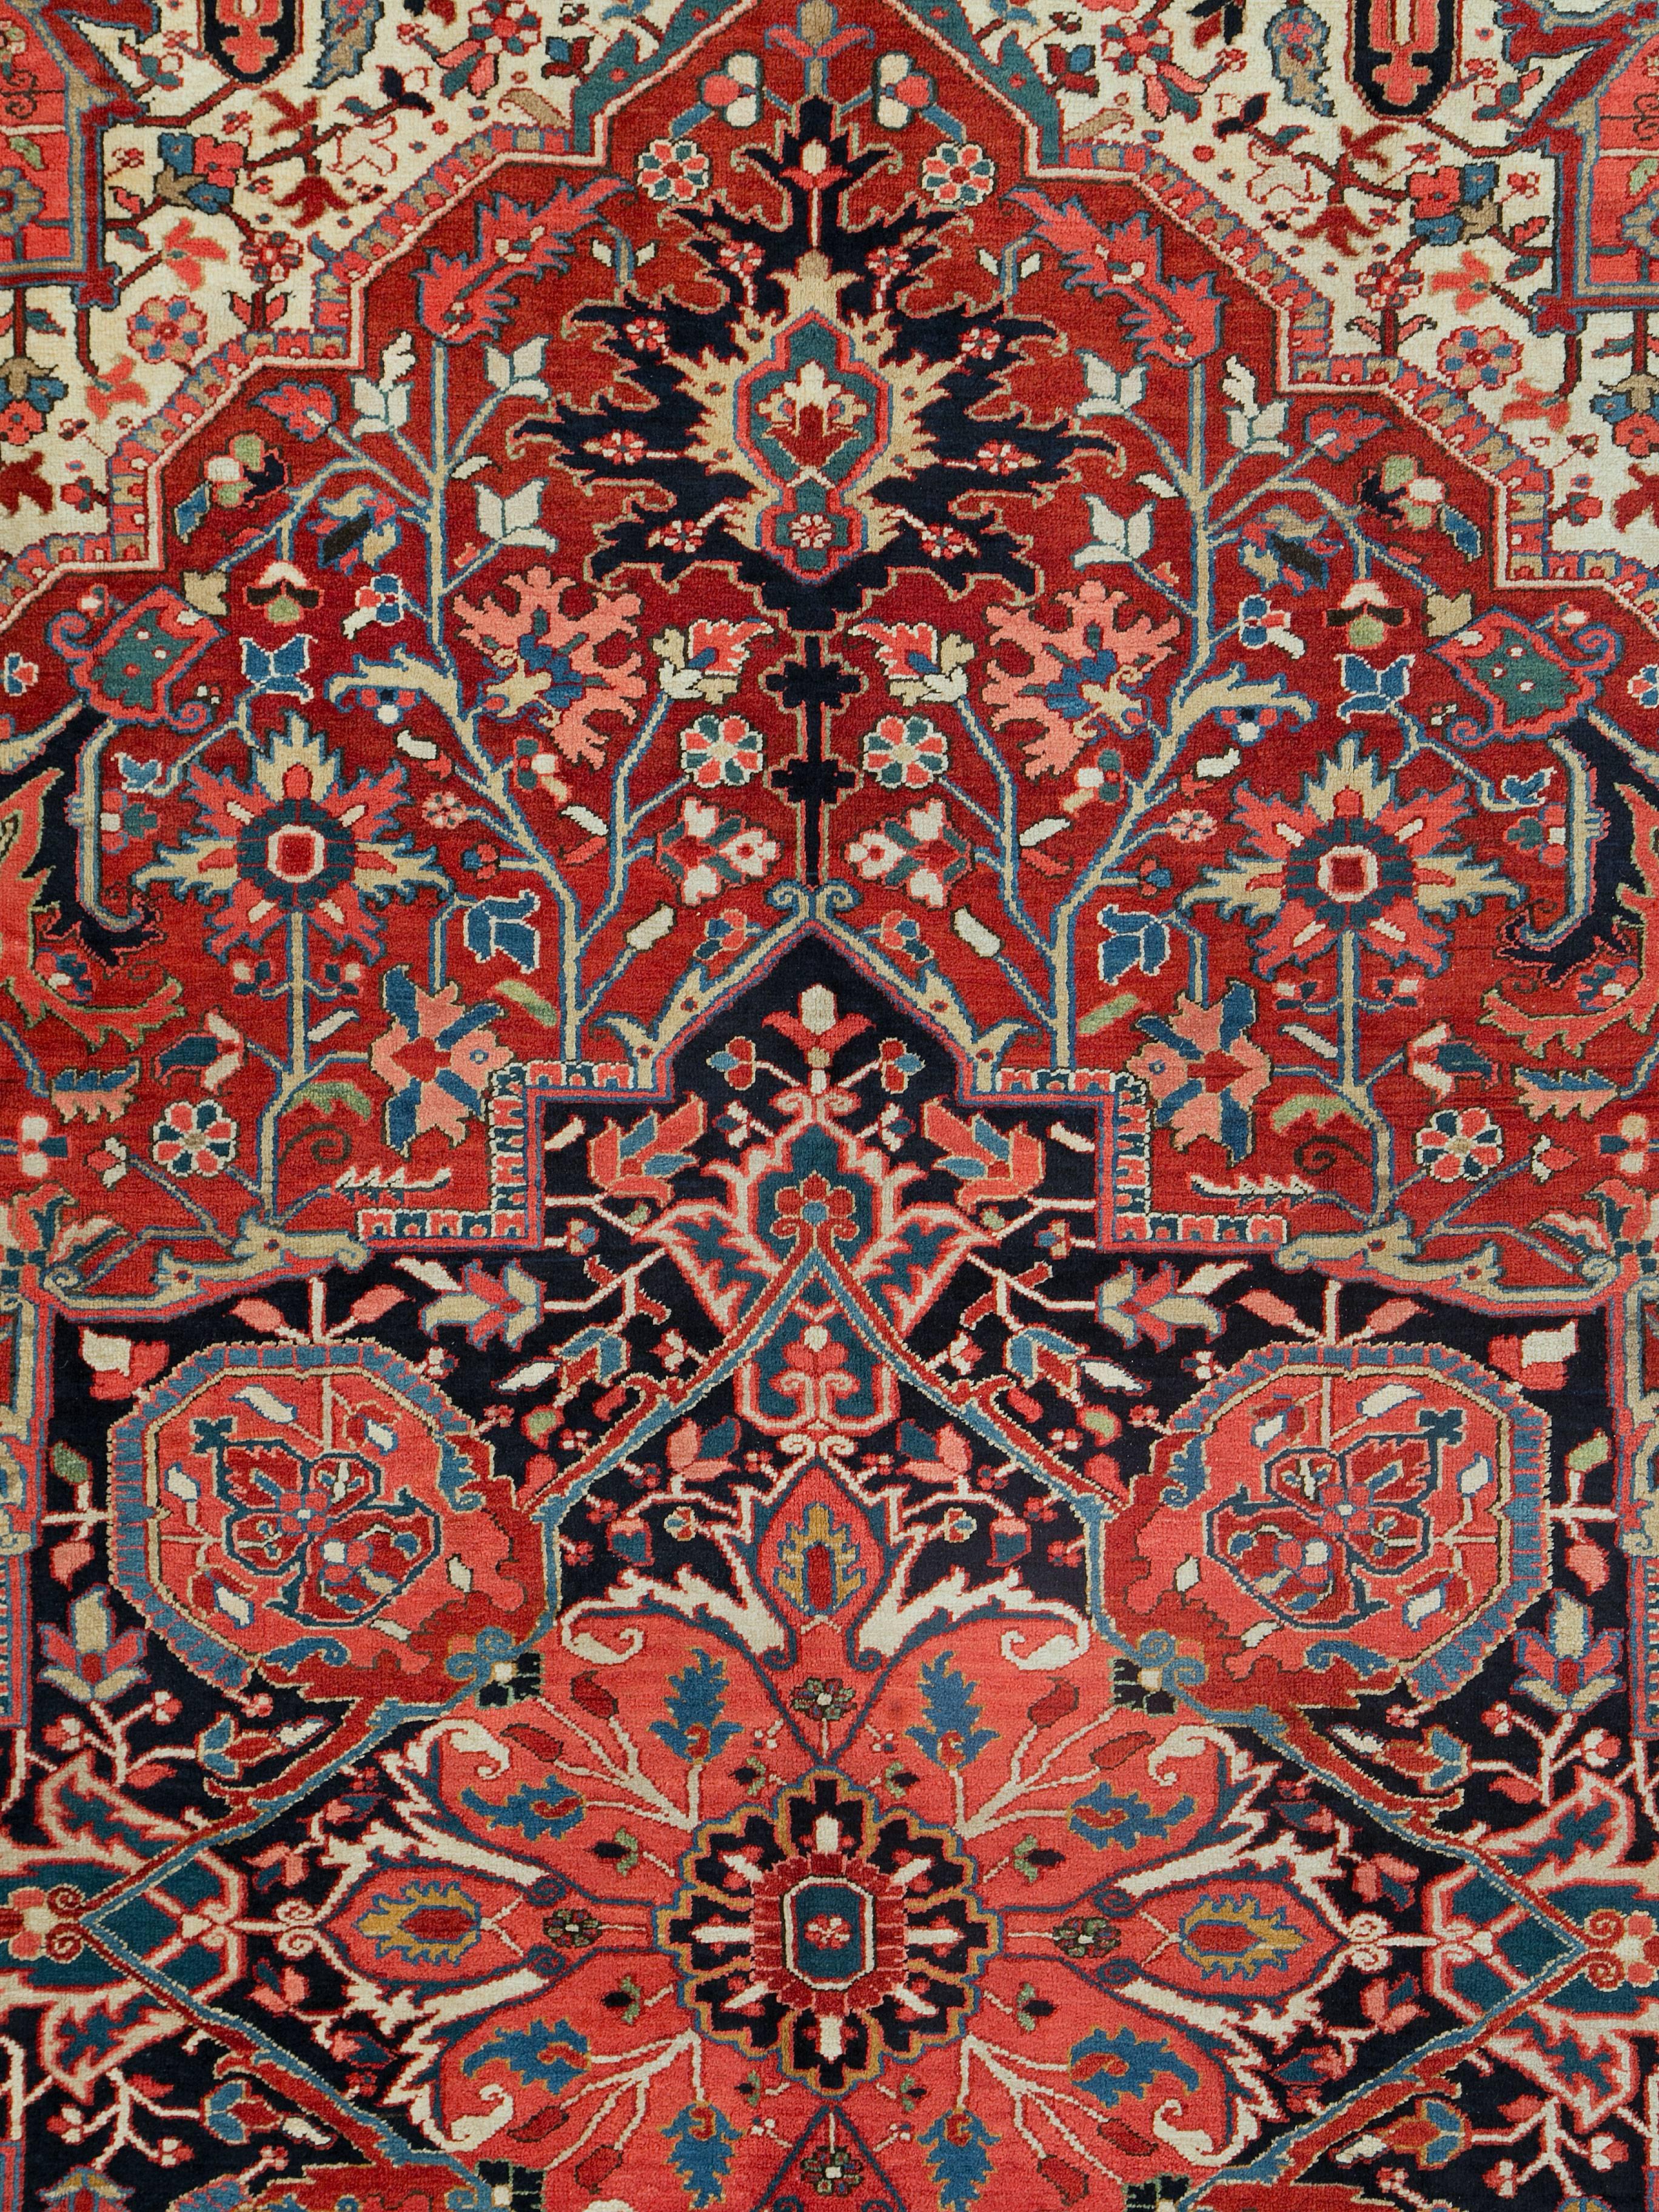 A vintage Persian Heriz carpet from the second quarter of the 20th century.